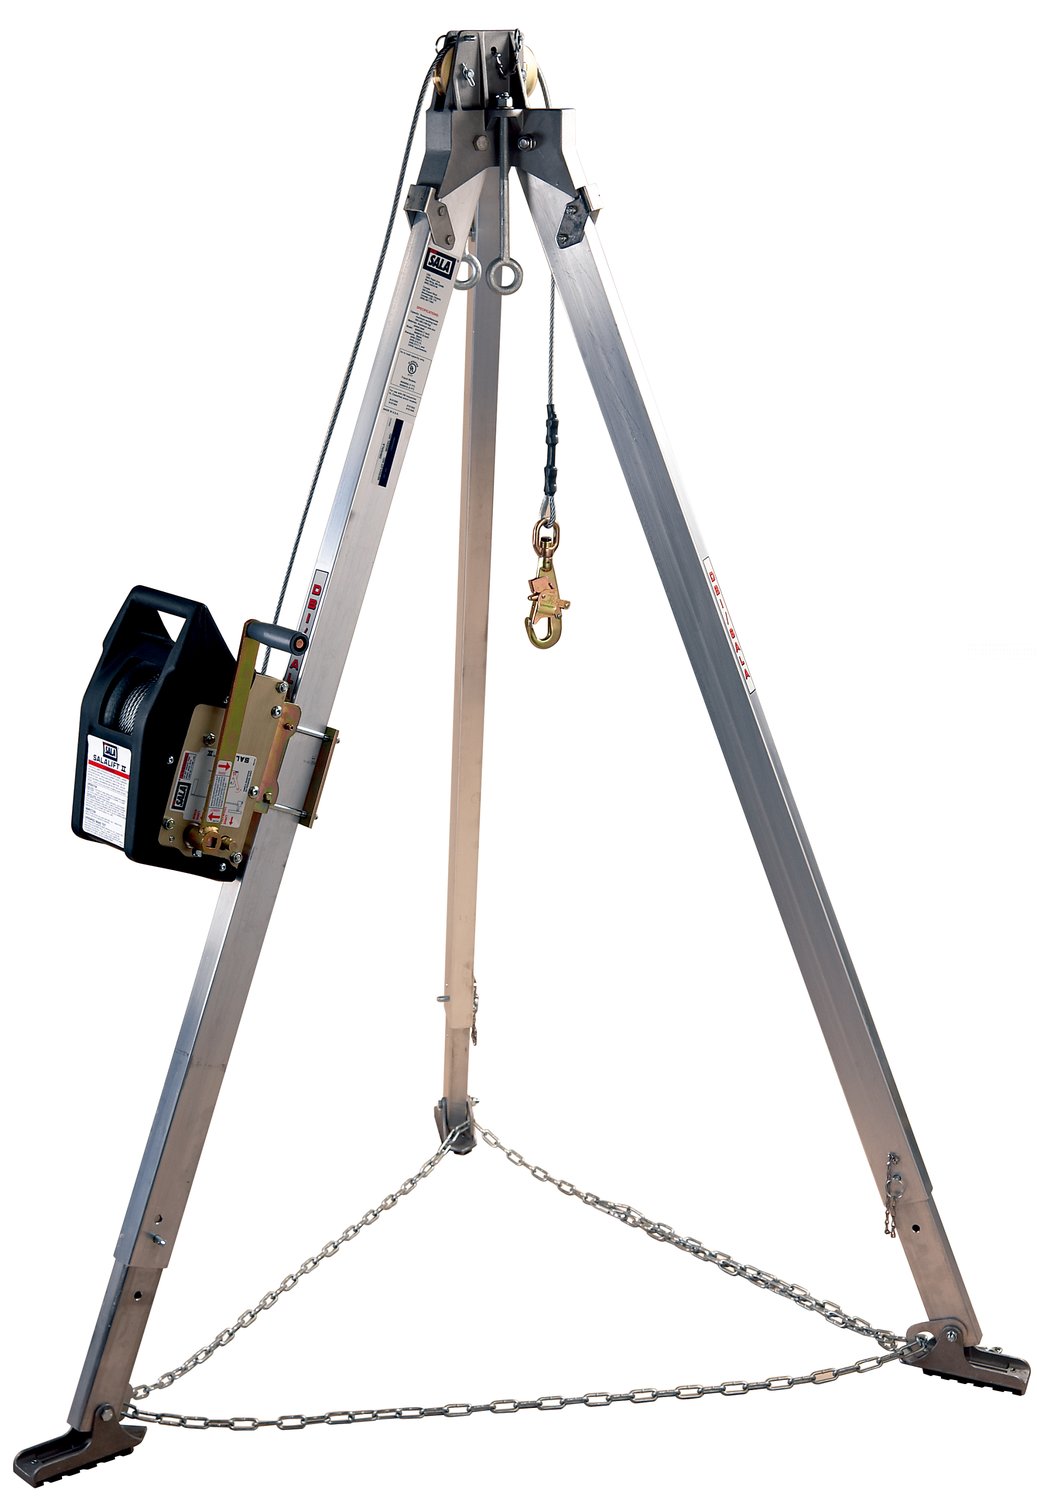 7100313937 - 3M DBI-SALA Confined Space Aluminum Tripod with Winch 8300040, 9 ft
High, 60 ft Galvanized Cable